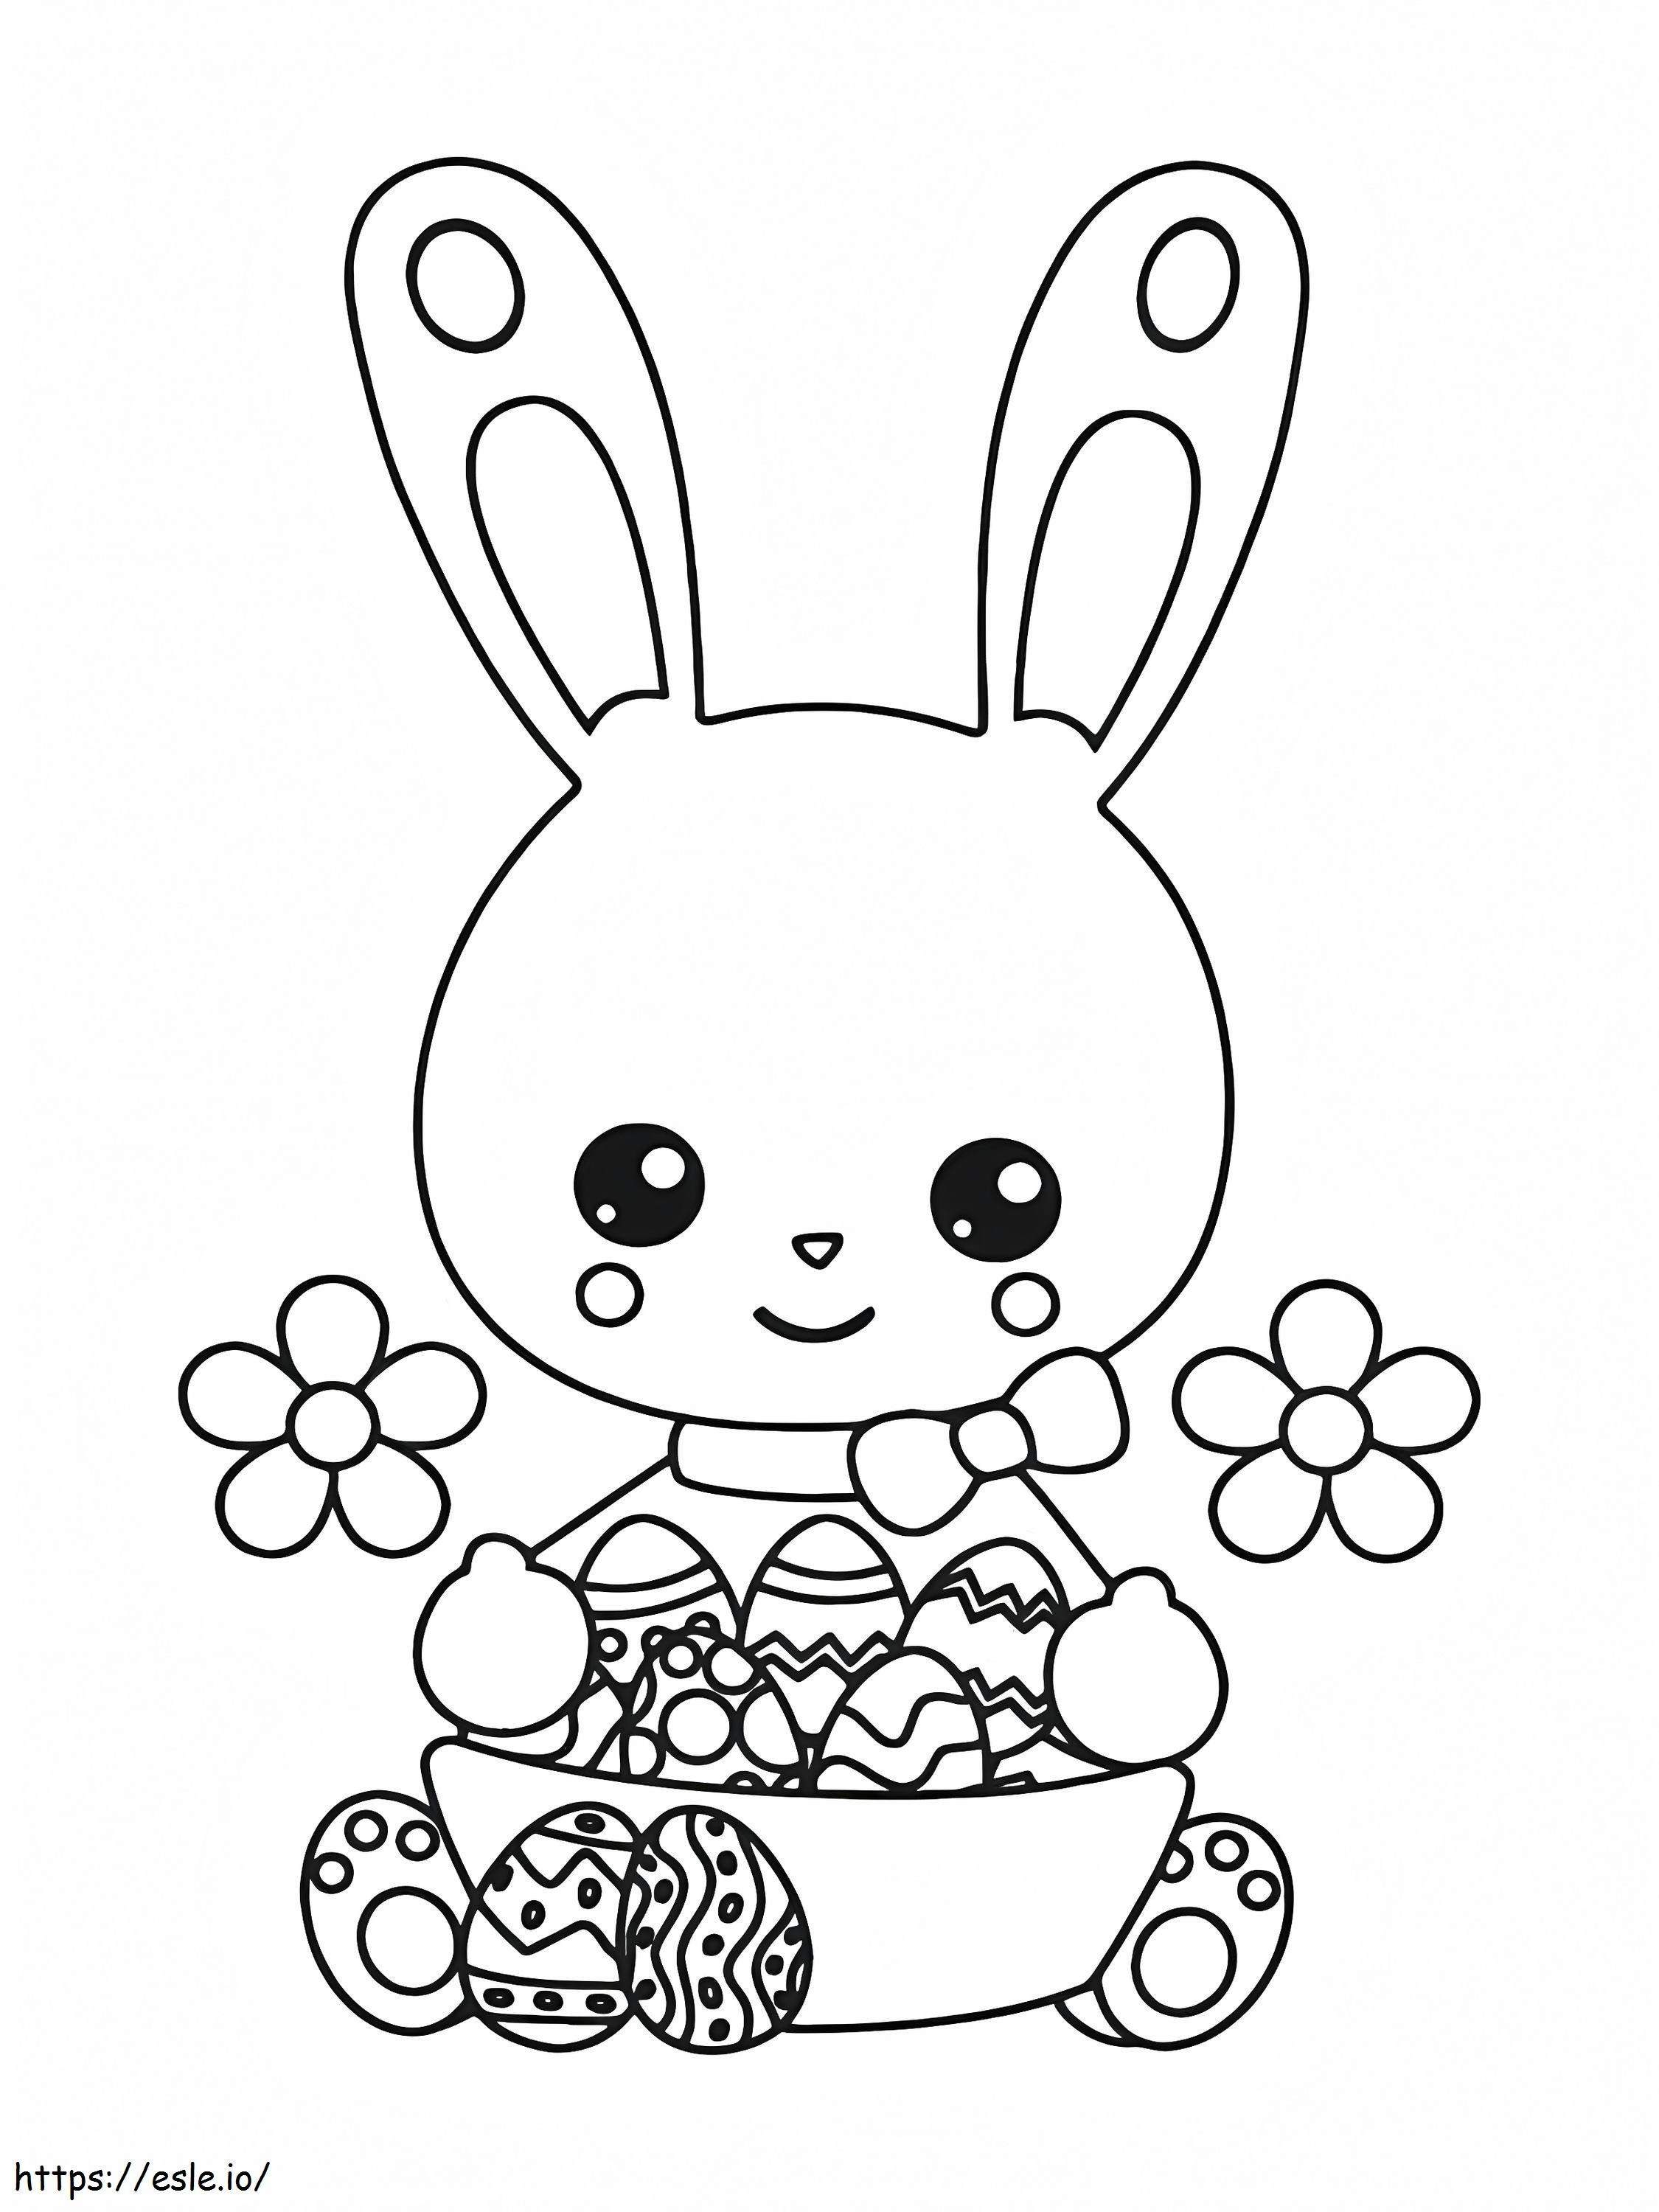 Cute Easter Bunny And Flowers coloring page